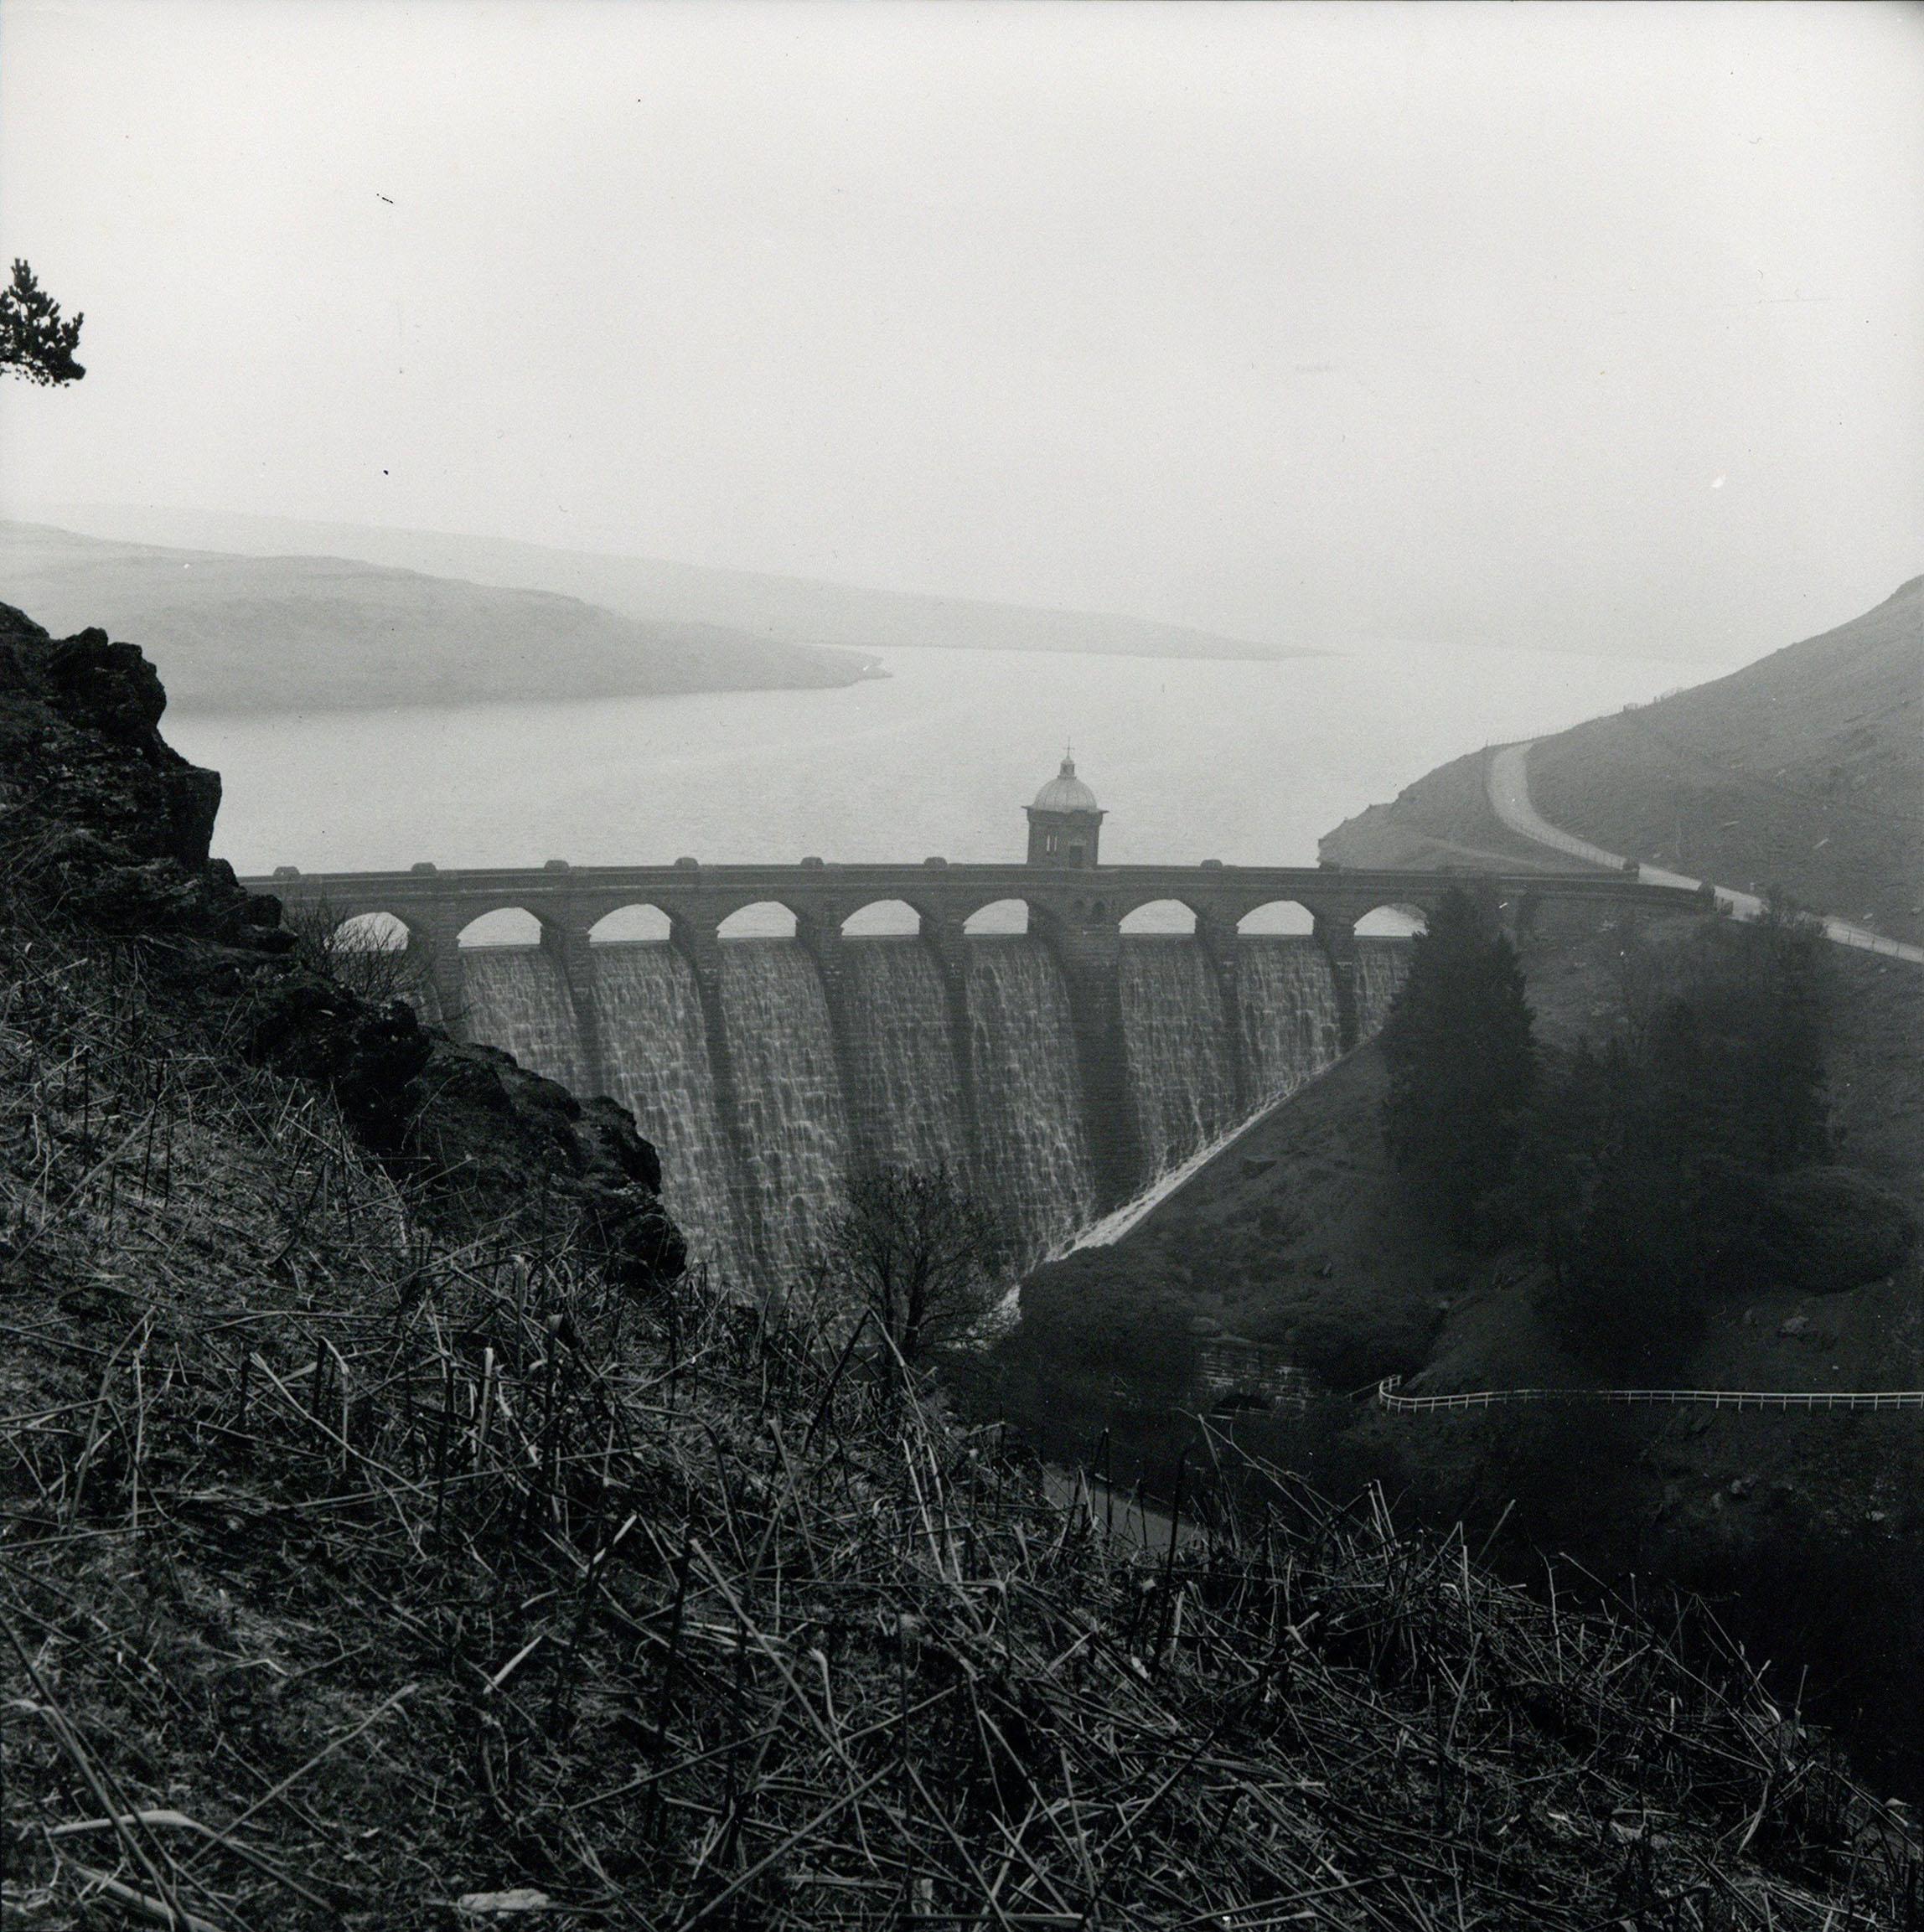 Rosemary Ellis
Dam II
Original photography for Pipes and Wires in the Outlooks and Insights series published by Bodley Head, composed by Rosemary & Charlotte Ellis.
Silver Gelatin Photograph Print
13x13cm

Rosemary Ellis was well known as a talented